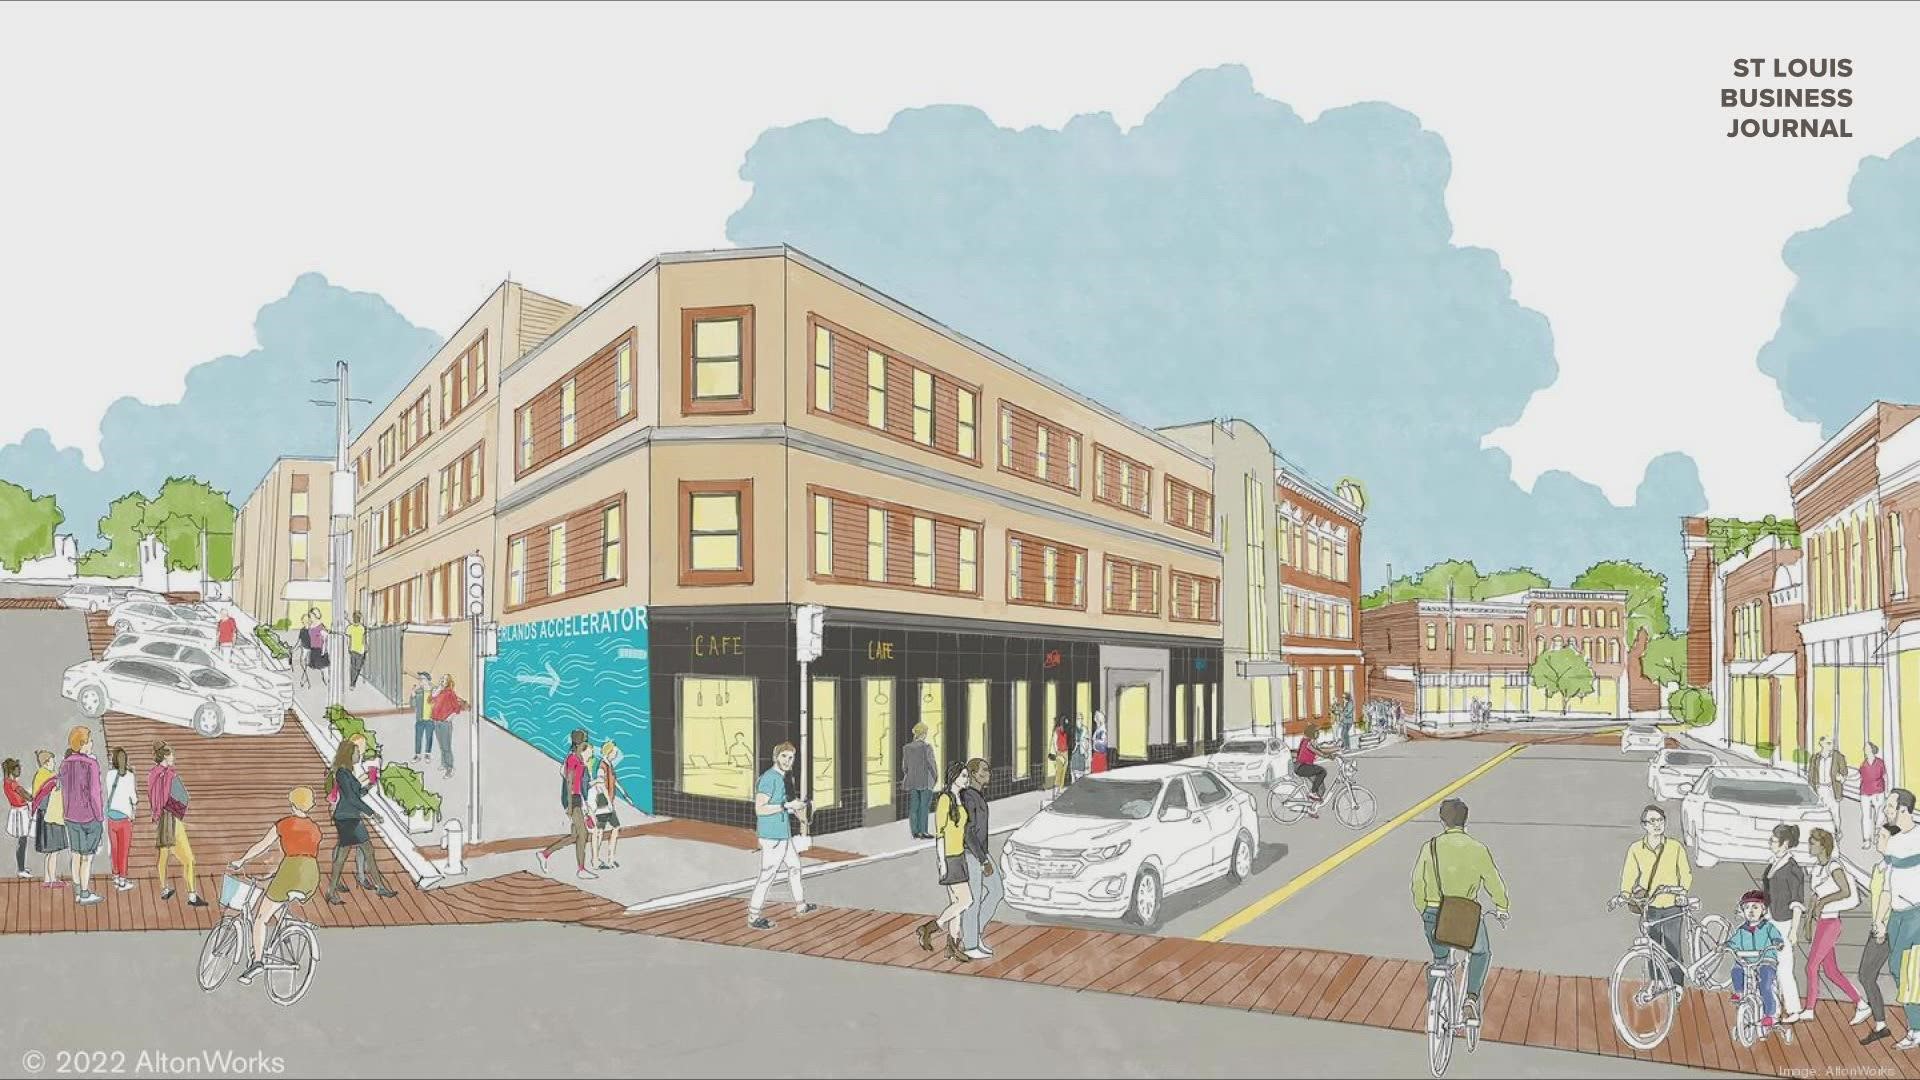 The $21 million project will include private offices, restaurants and retail space. Construction is set to begin in October.